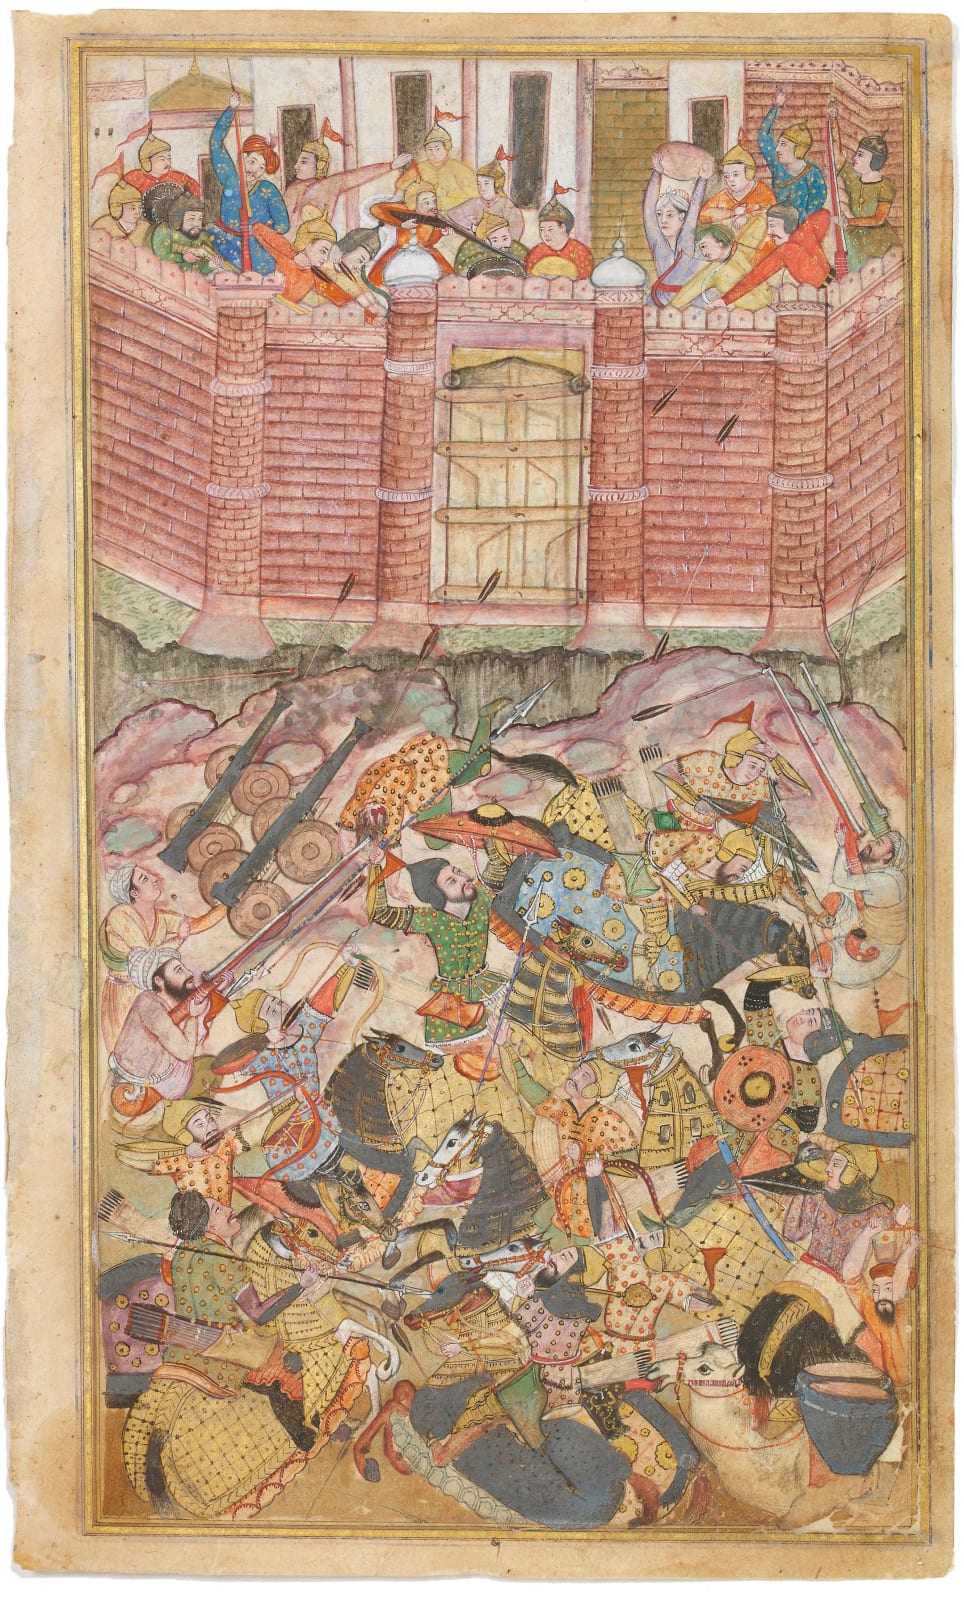 A leaf from a manuscript of the Baburnama with a full-page miniature of a battle between Khwaja Qazi and Aba-bikr at Uzgend in 1493-4, Imperial Mughal, made for Akbar, c. 1589